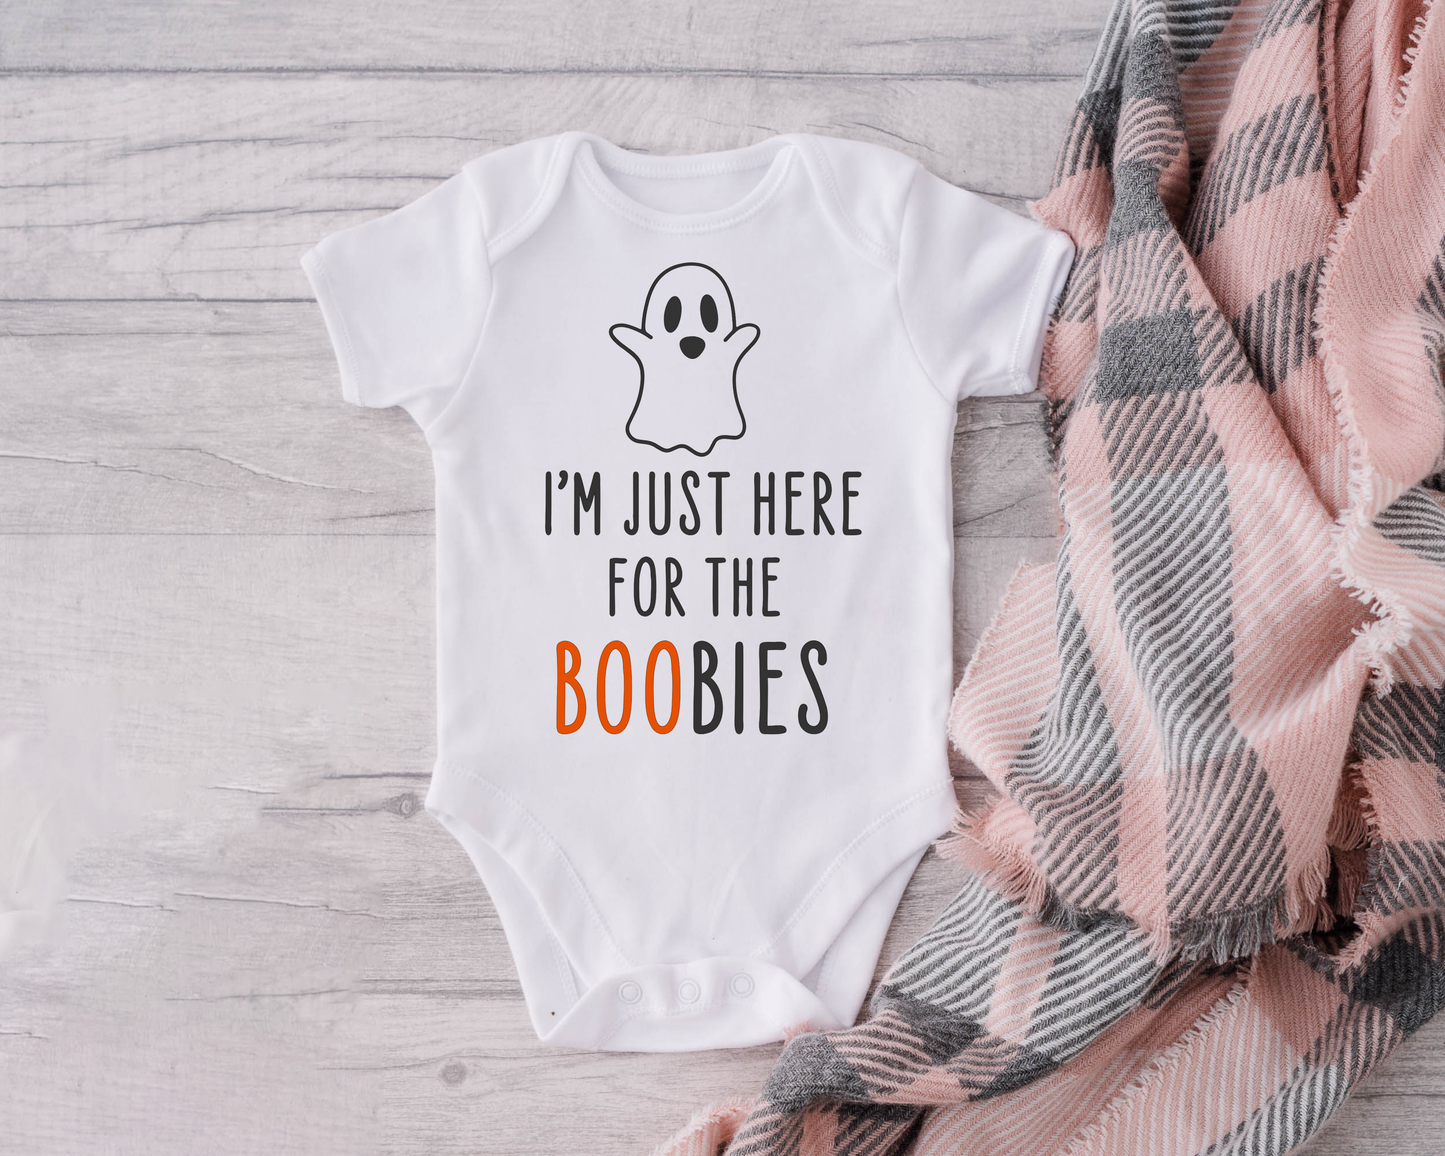 I'm just here for the BOObies! | Funny Halloween Baby Onesie Bodysuit